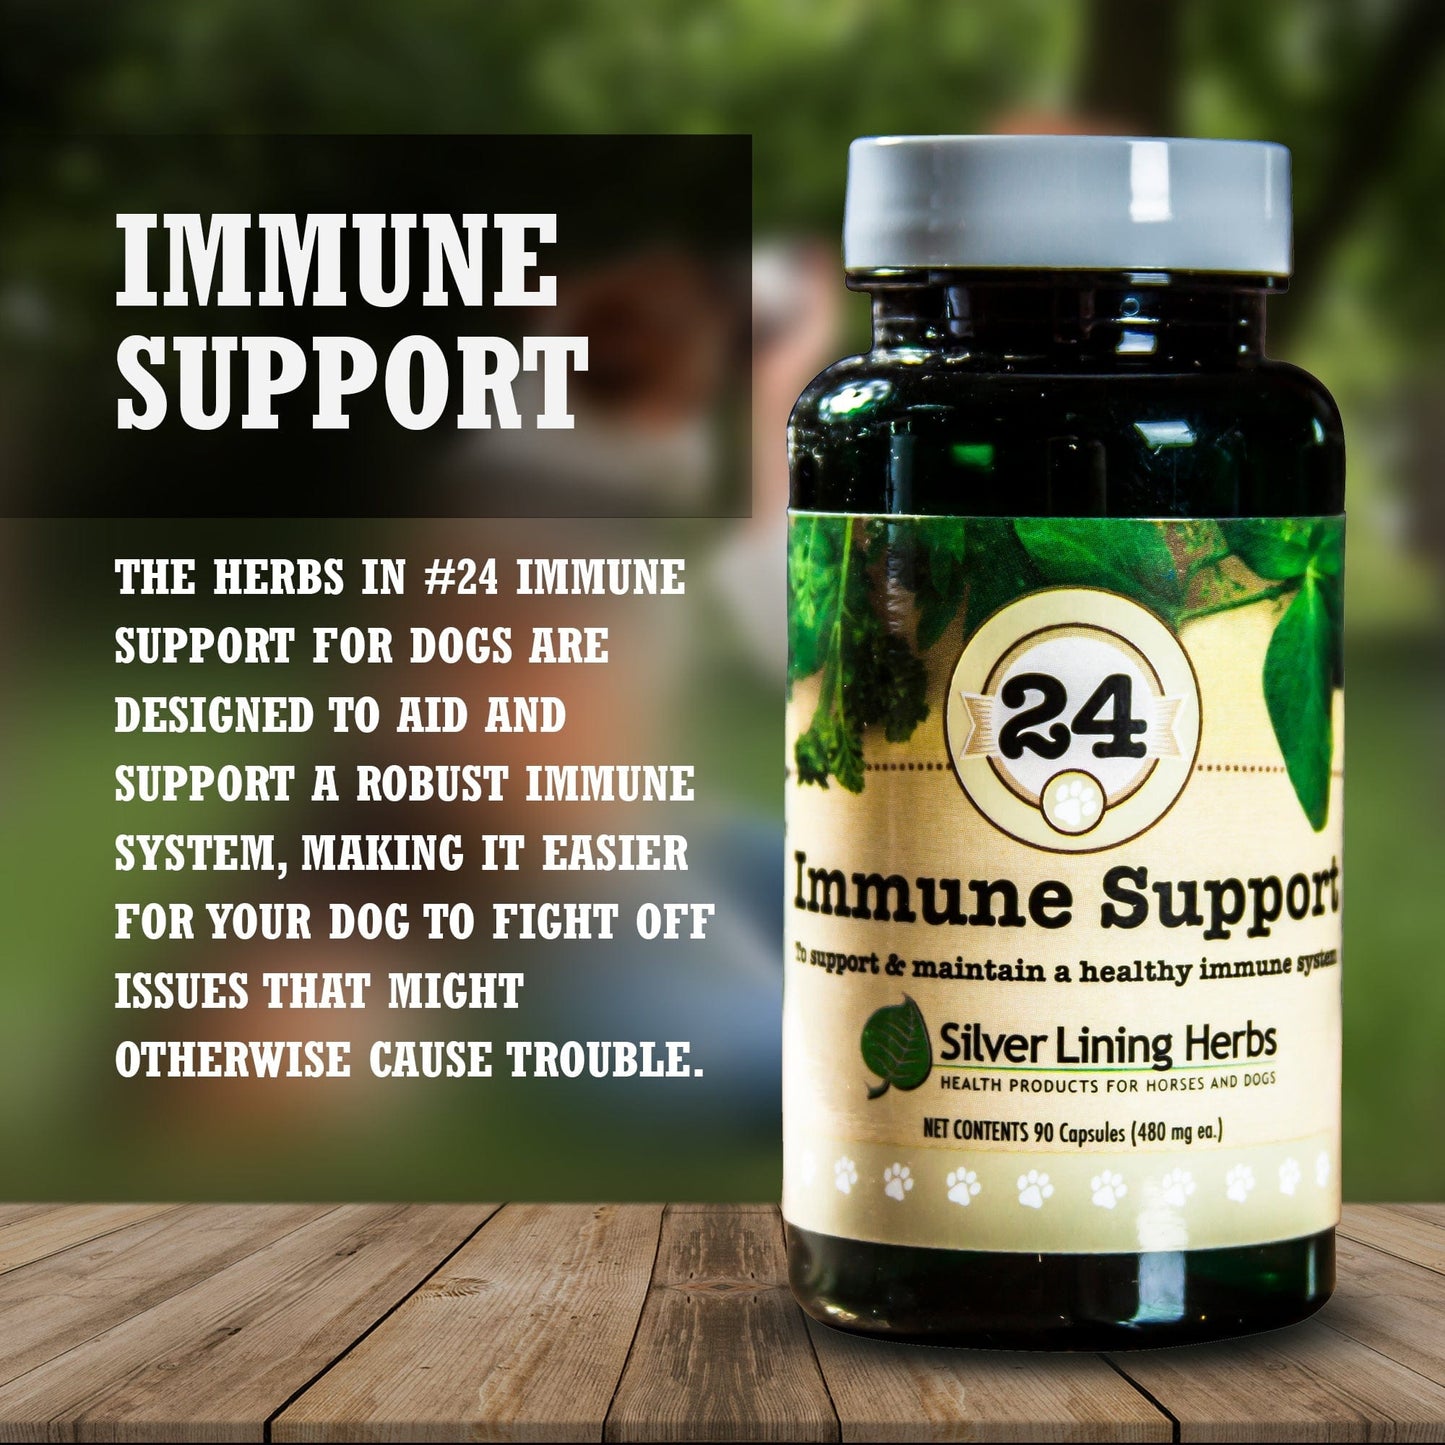 Immune Support for Dogs - Silver Lining Herbs